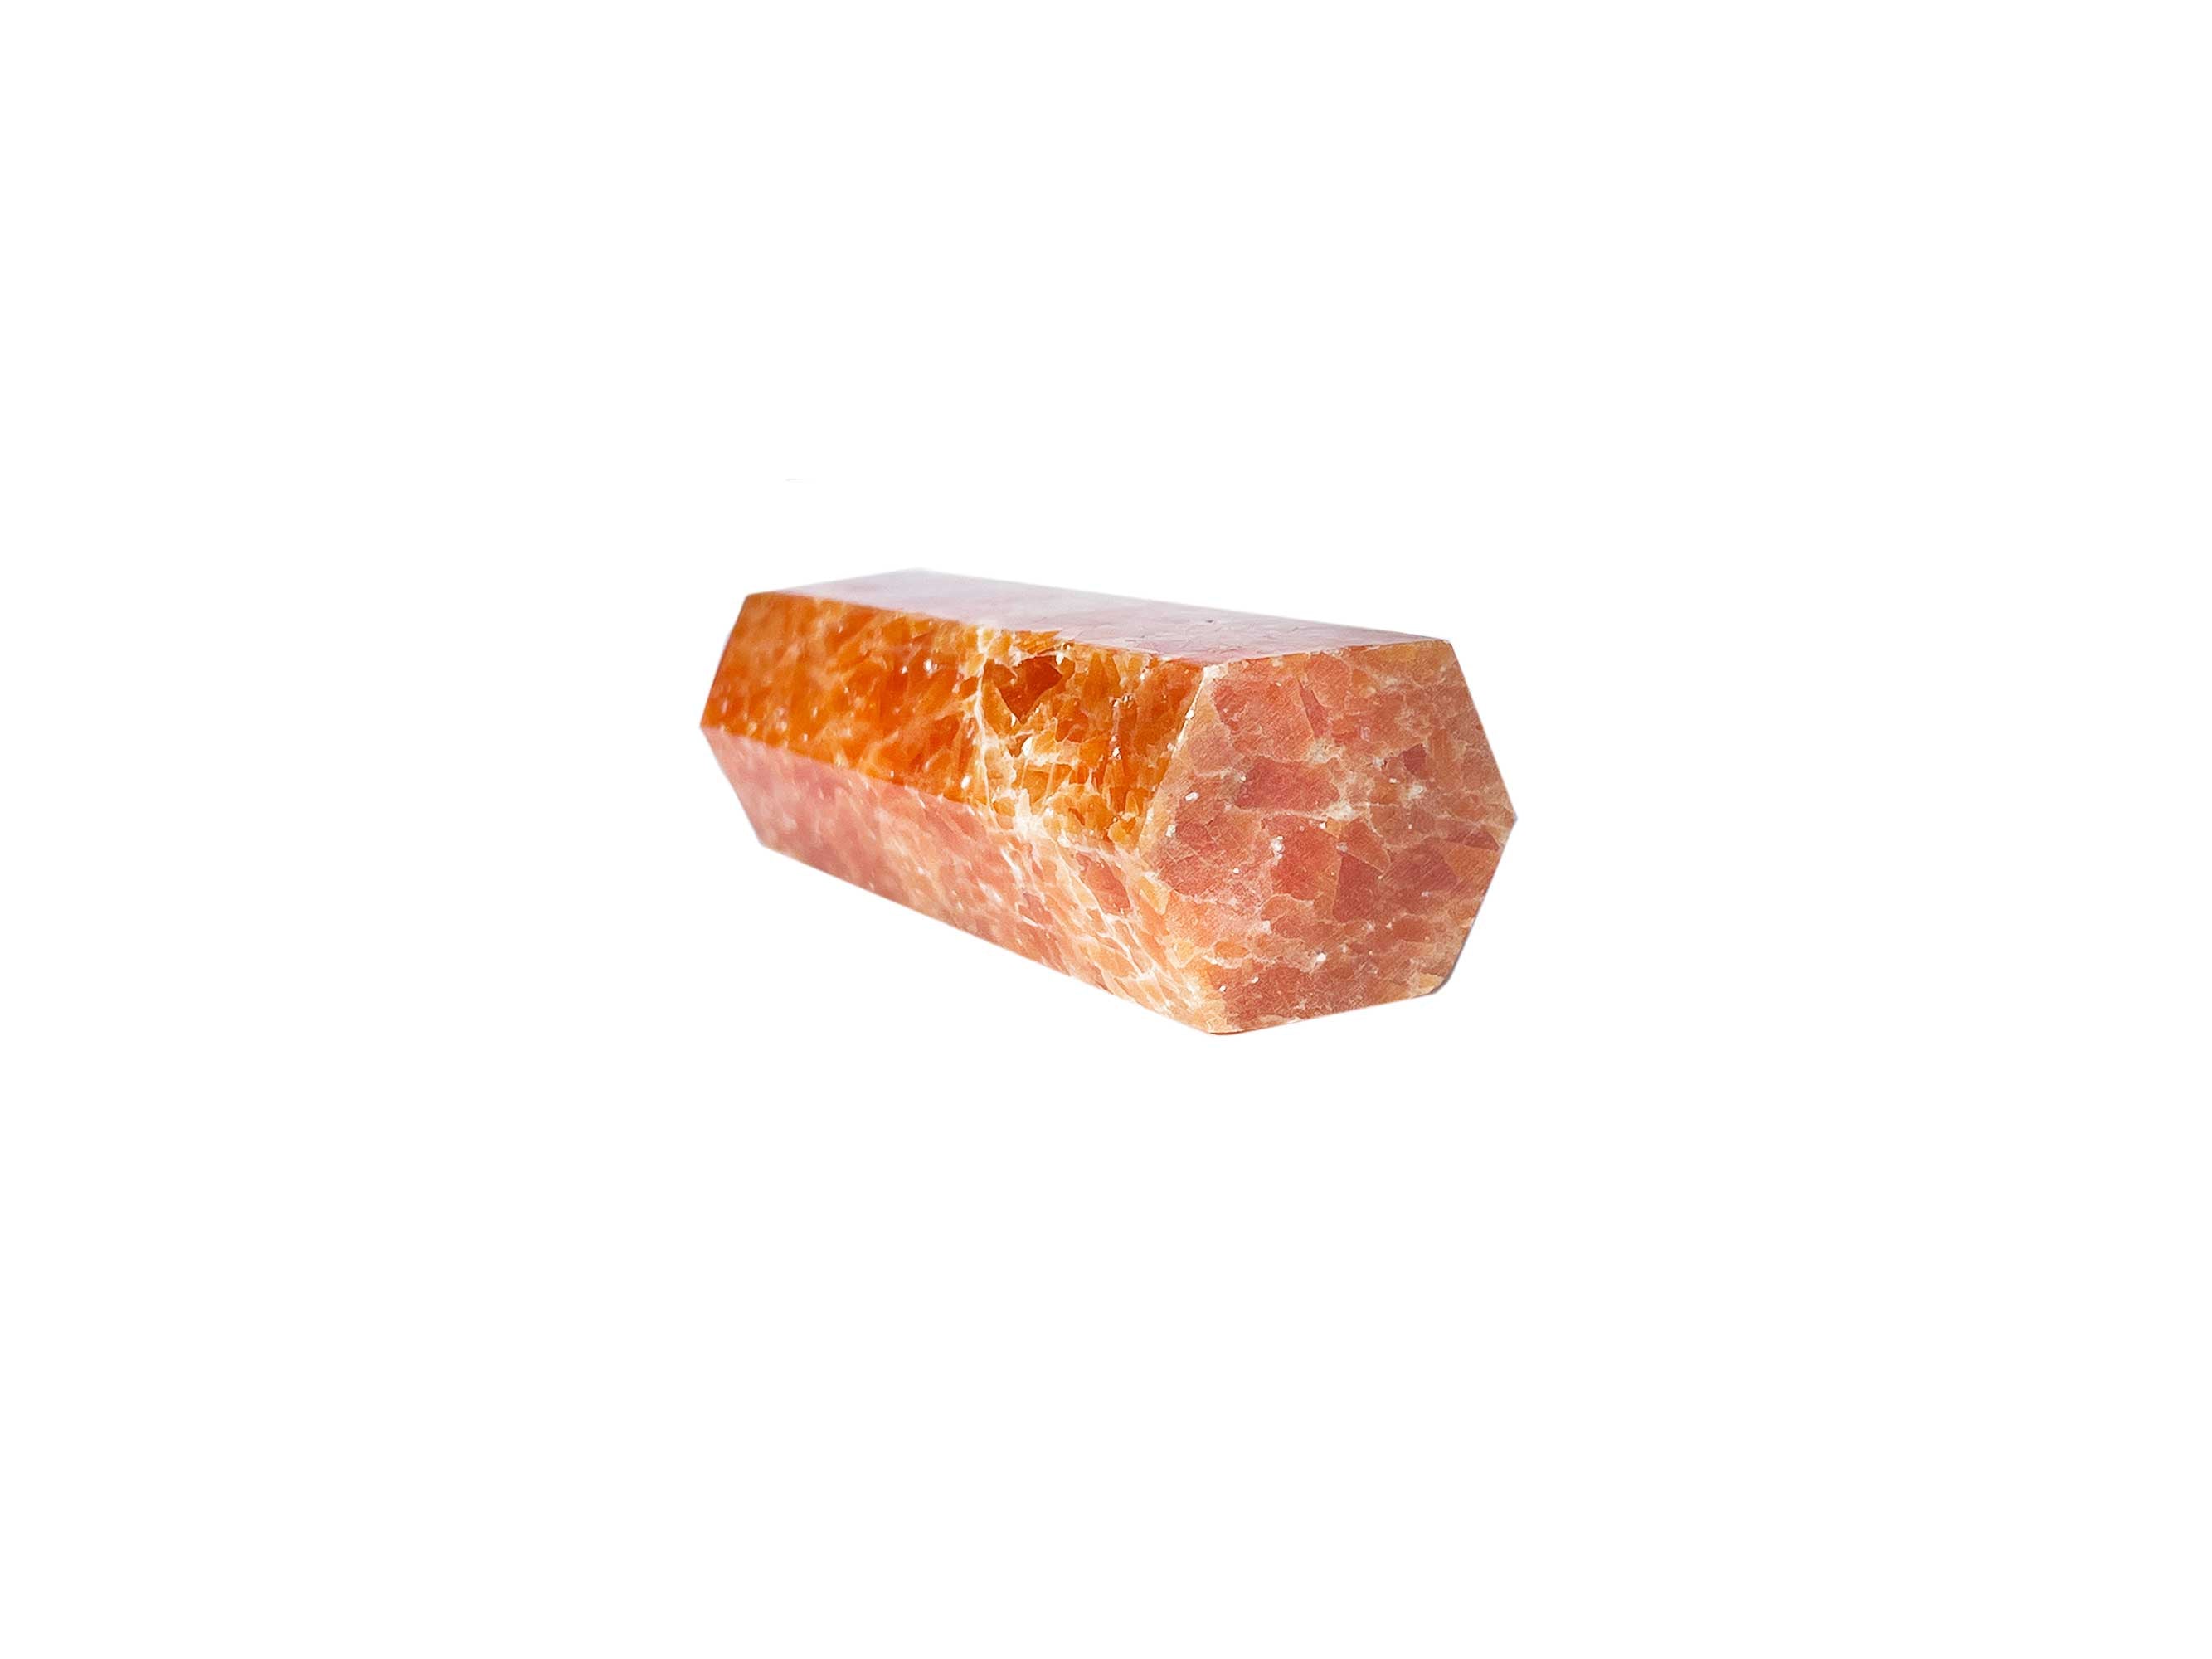 Buy Online Latest and Unique Orange Calcite Crystal Tower Point | Shop Best Spiritual Items - The Mystical Ritual